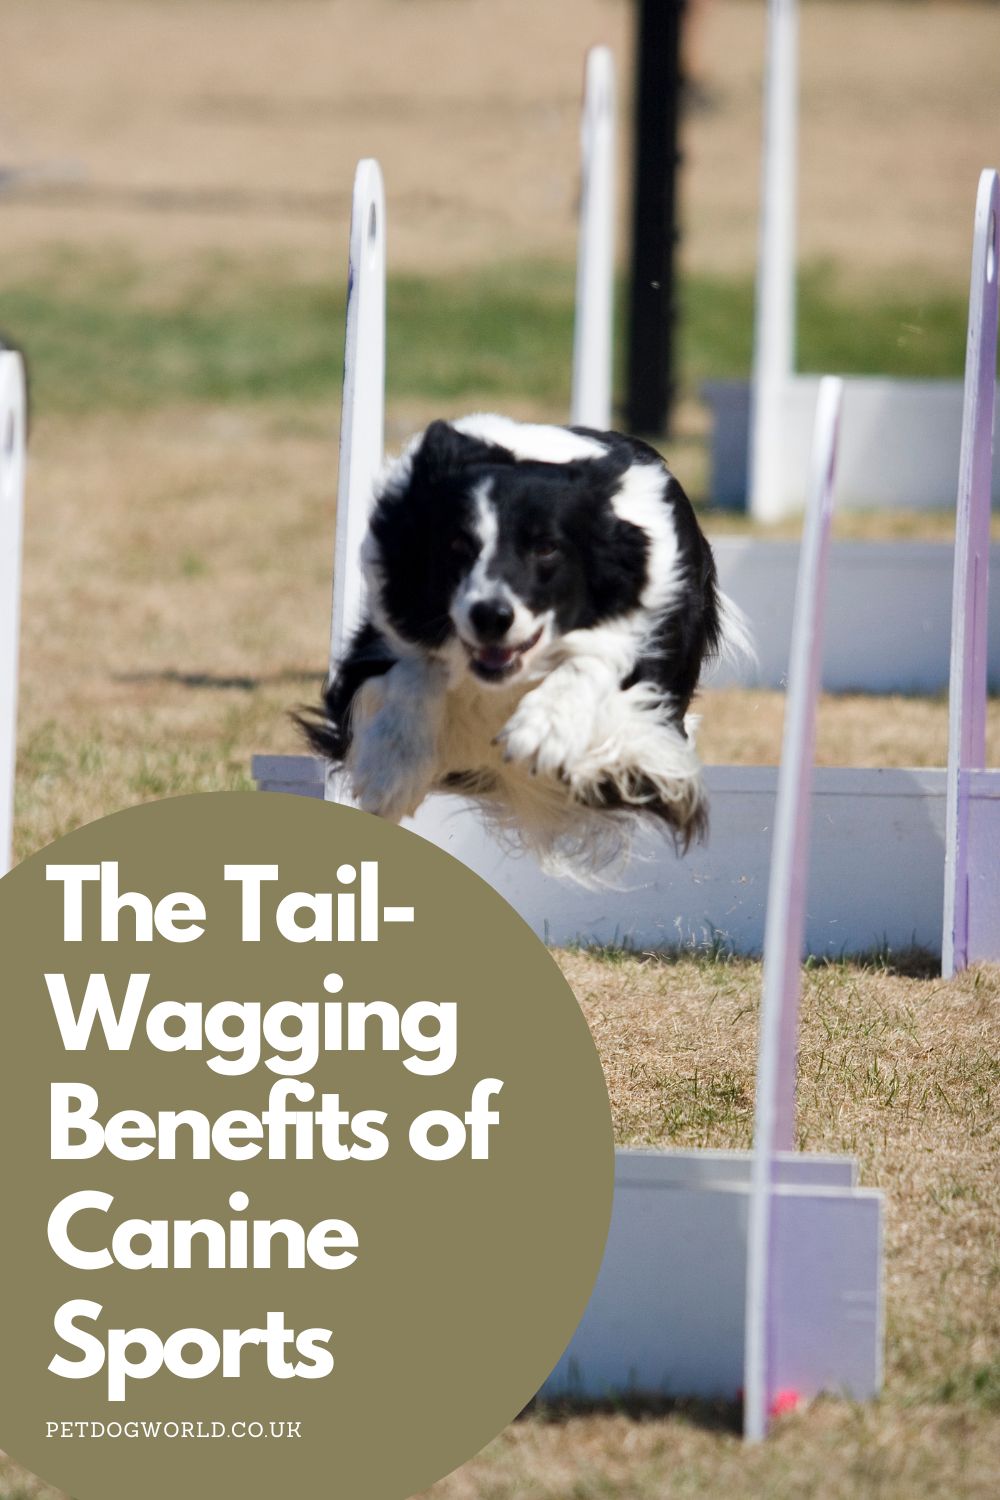 Read about the joy of canine sports! From agility to dock diving, find the perfect activity for your dog's fitness and happiness.